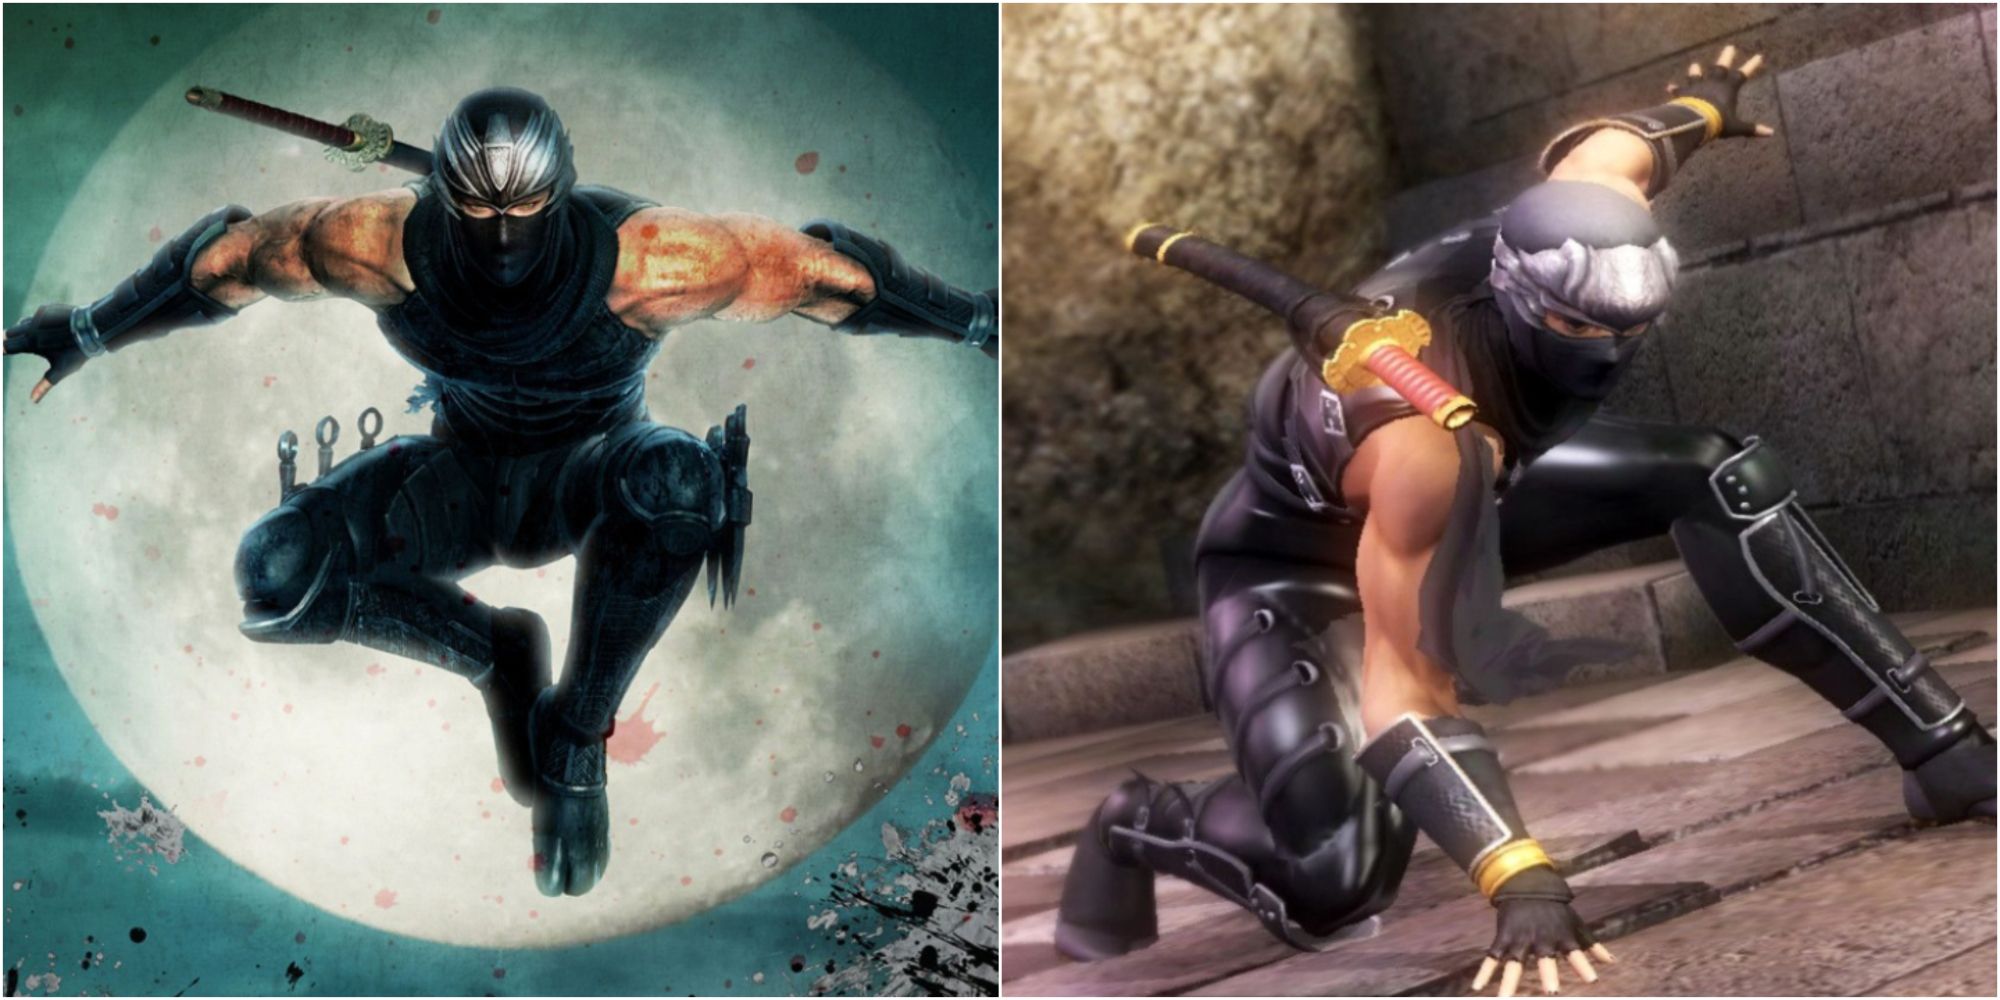 Ninja Gaiden collage of Ryu Hayabusa jumping infront of the moon and sticking the super hero landing